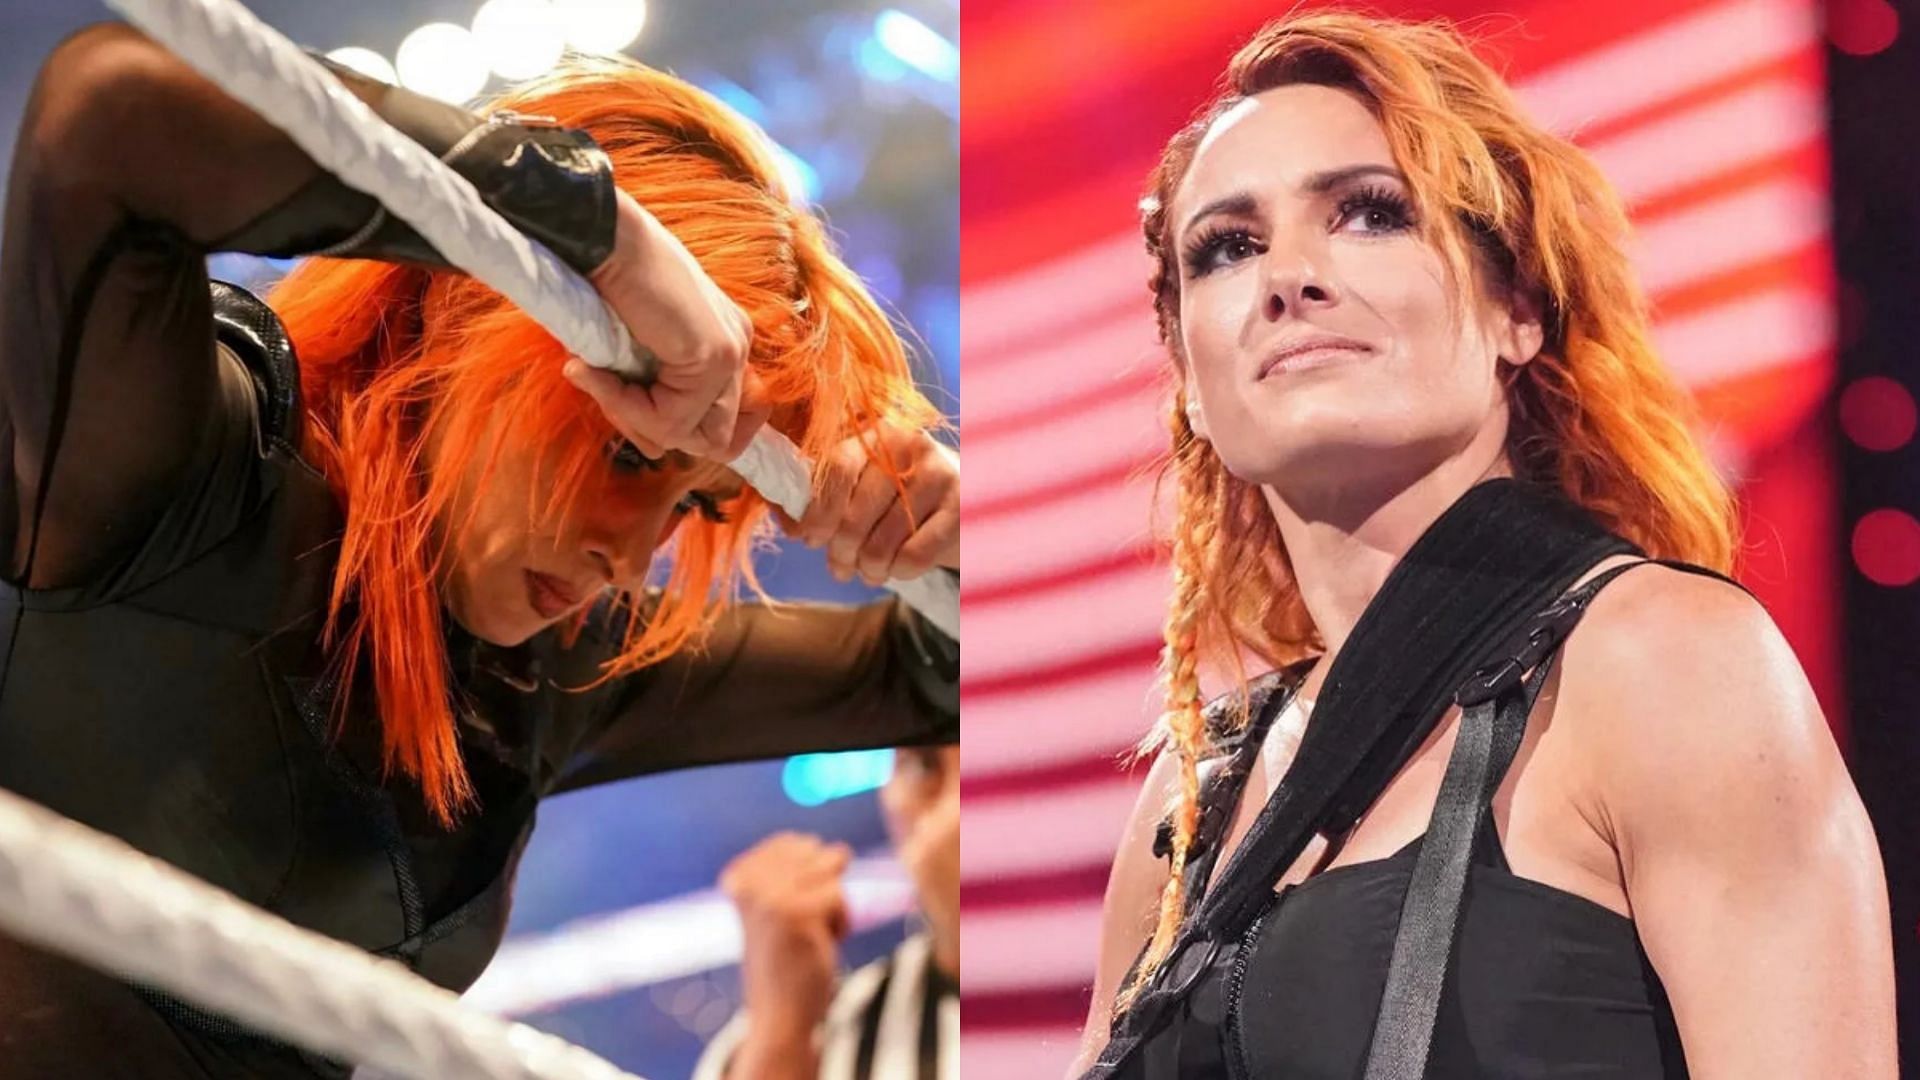 Becky Lynch was the subject of rumor quite a while before RAW